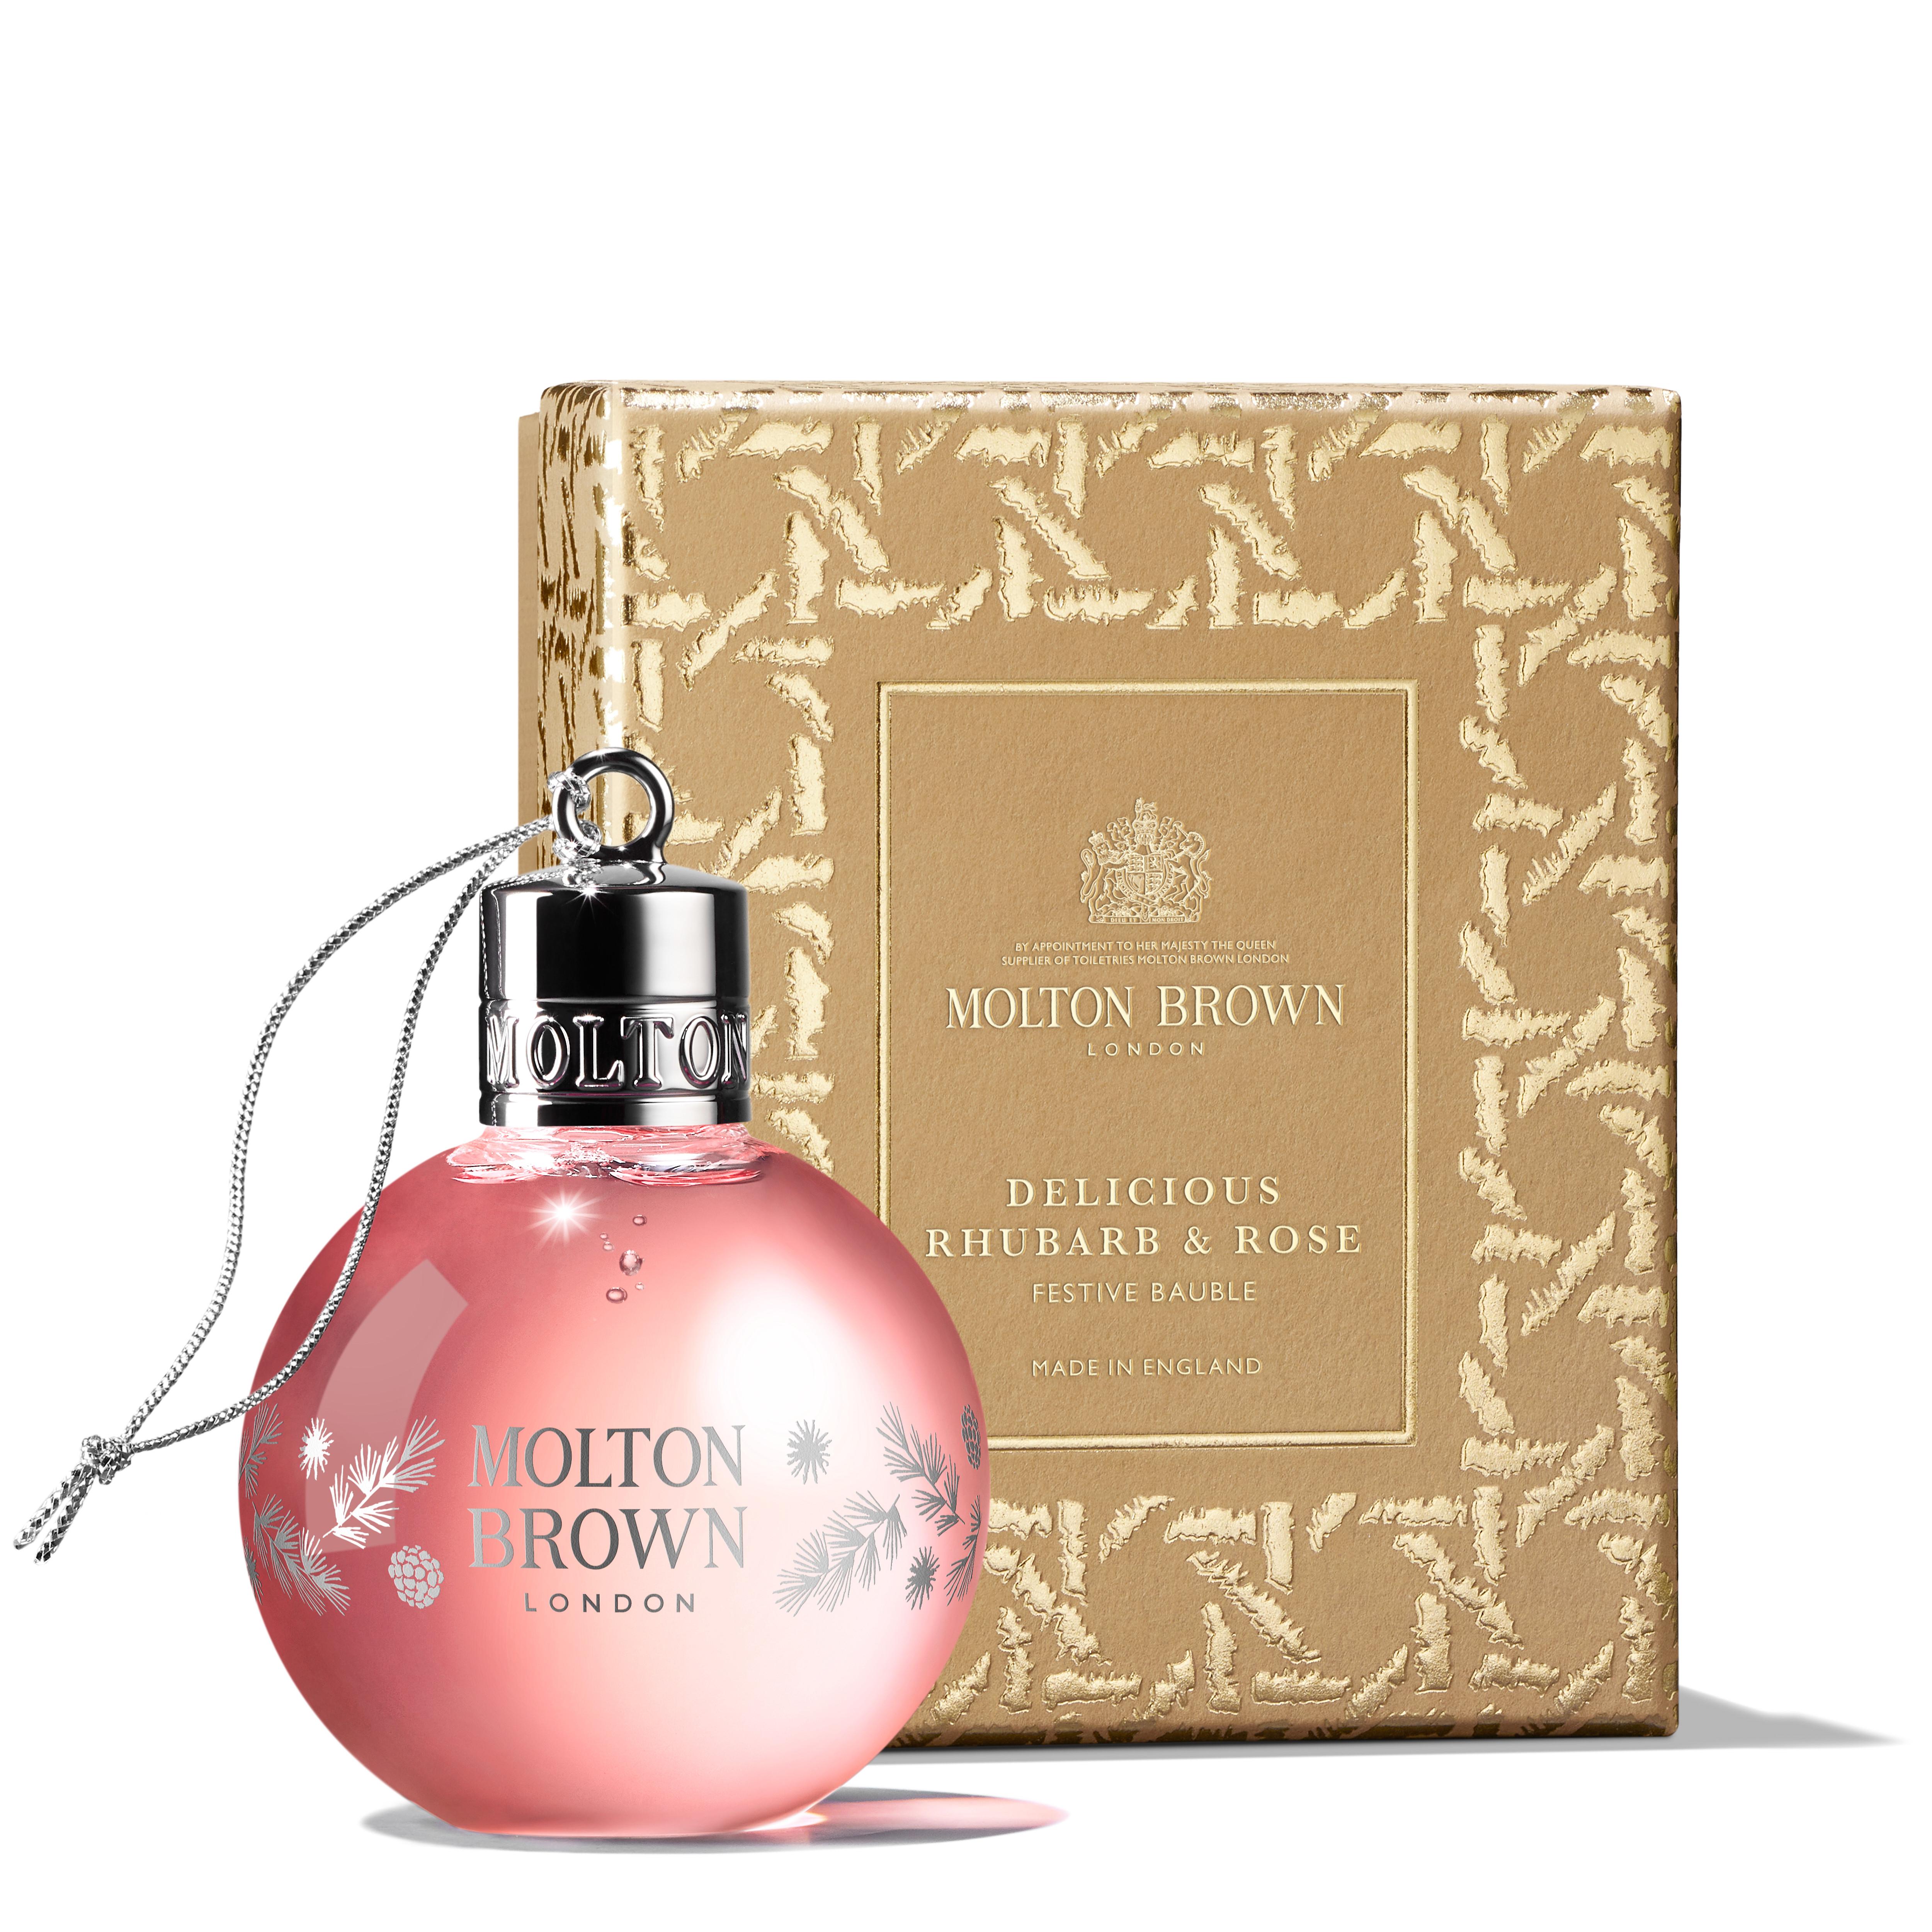 Molton Brown OUTLET Delicious Rhubarb & Rose Festive Bauble